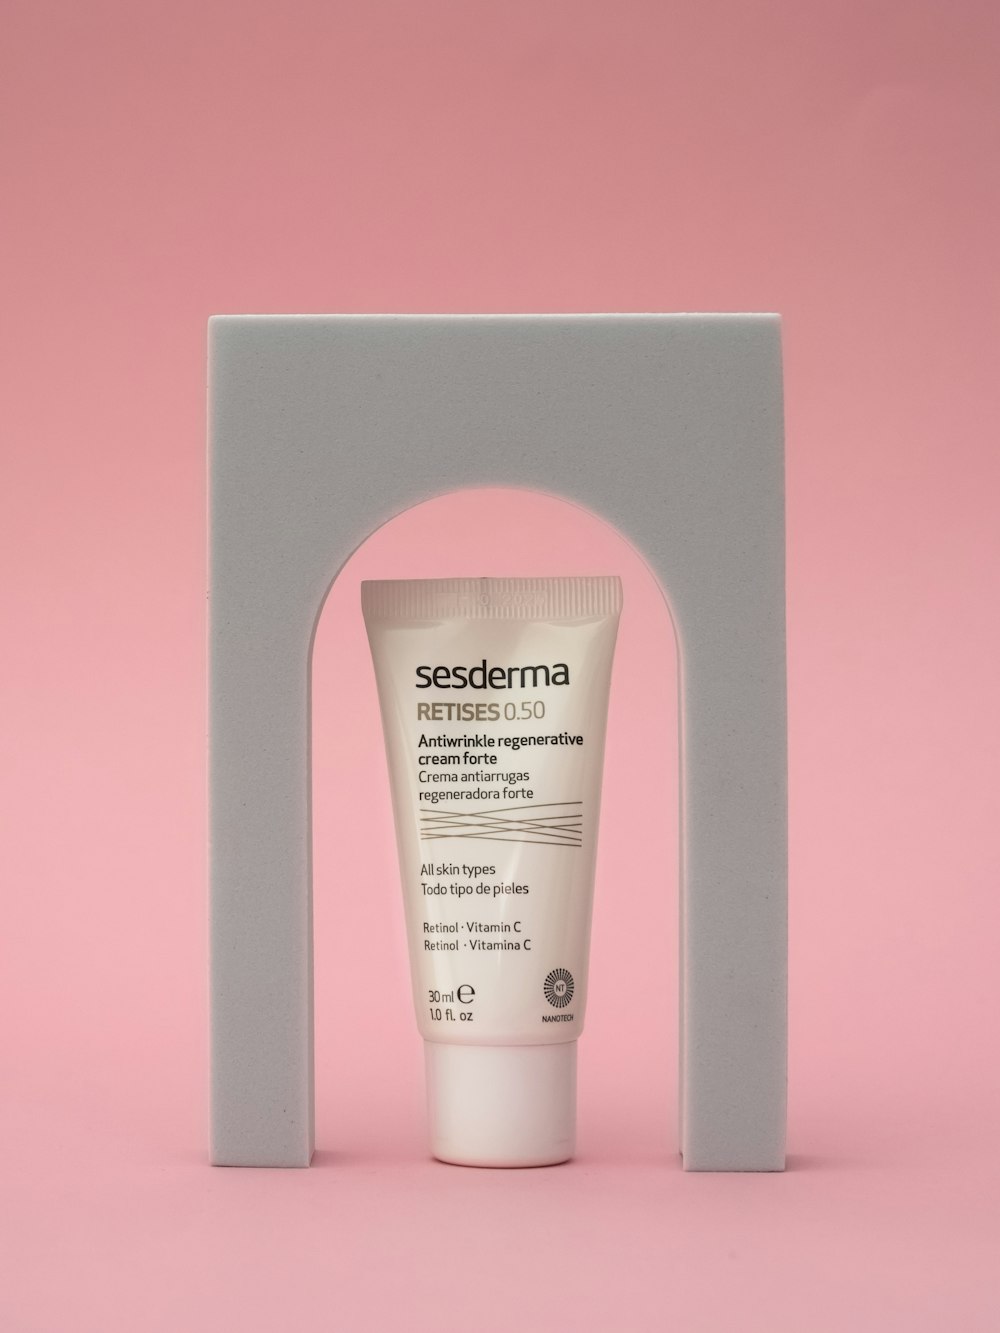 a tube of seedderma on a pink background